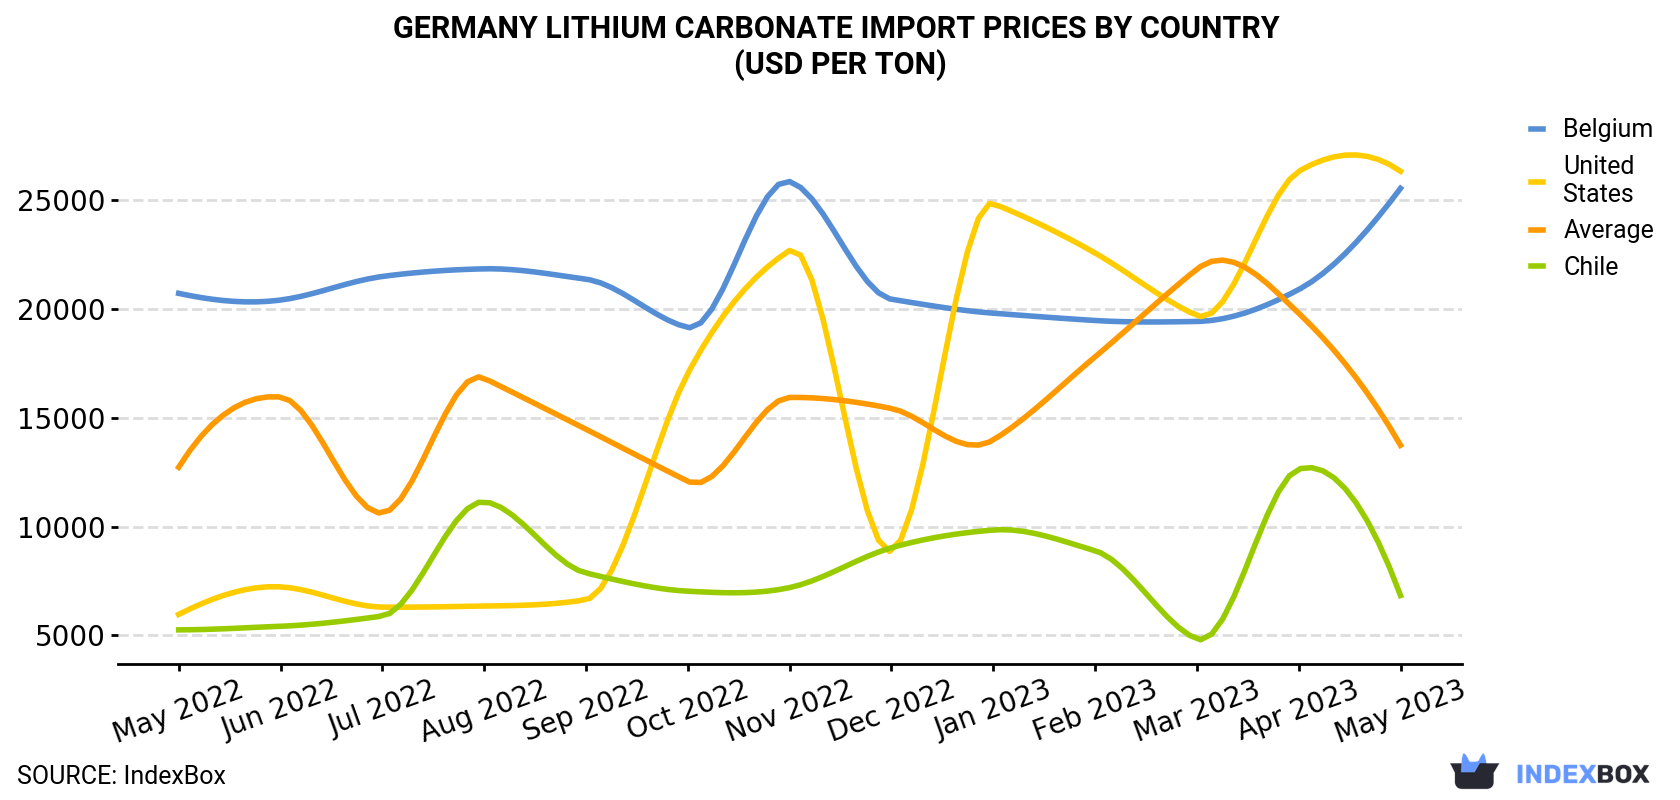 Germany Lithium Carbonate Import Prices By Country (USD Per Ton)